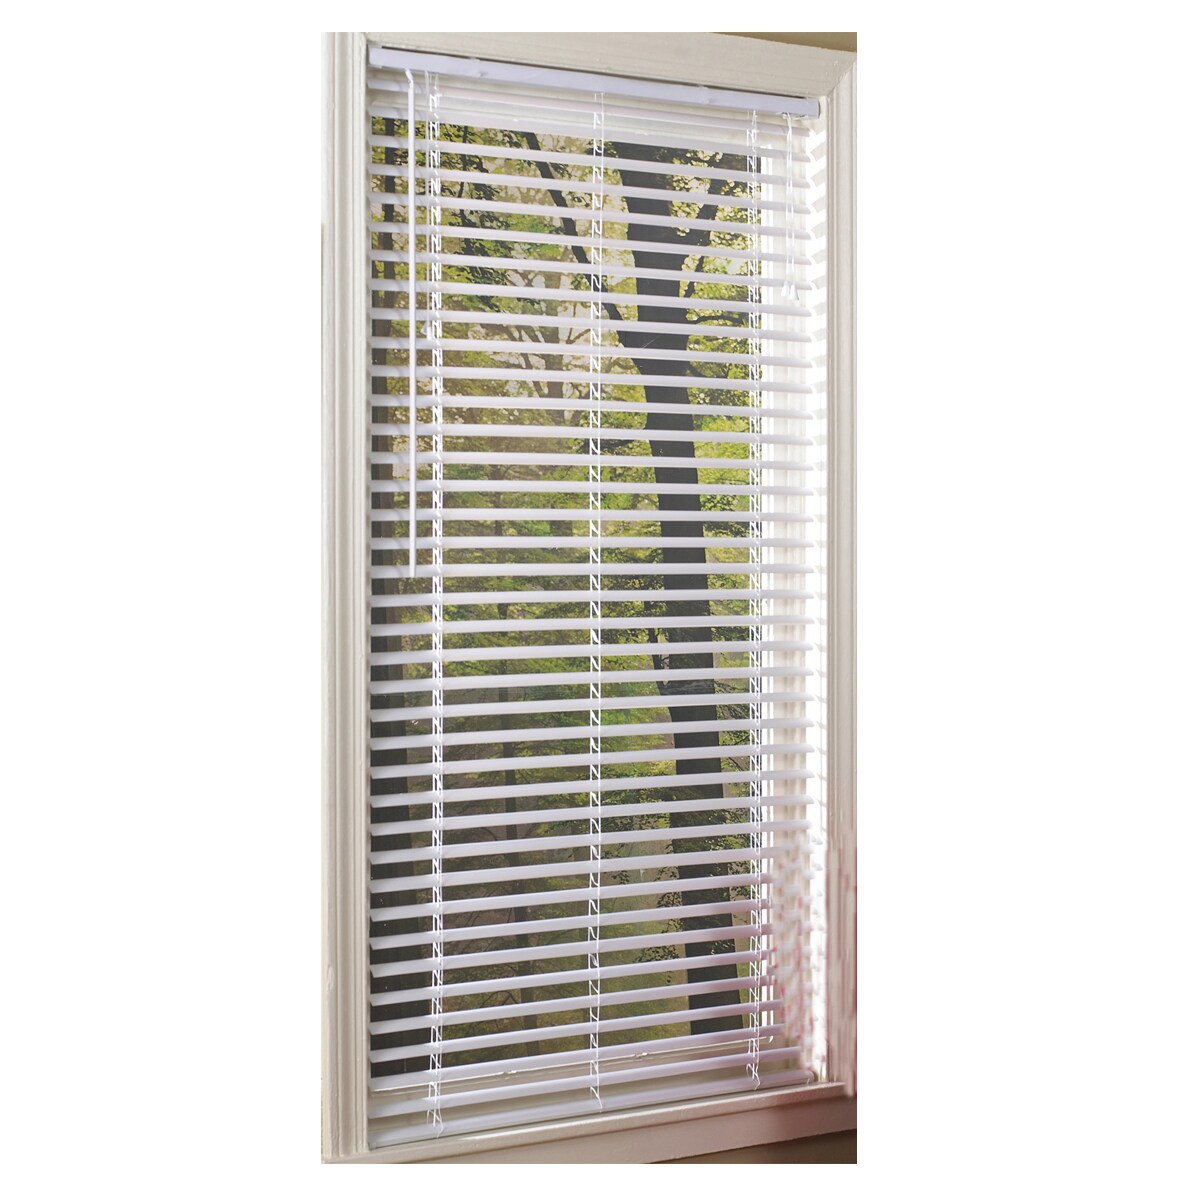 project source 2 inch blinds